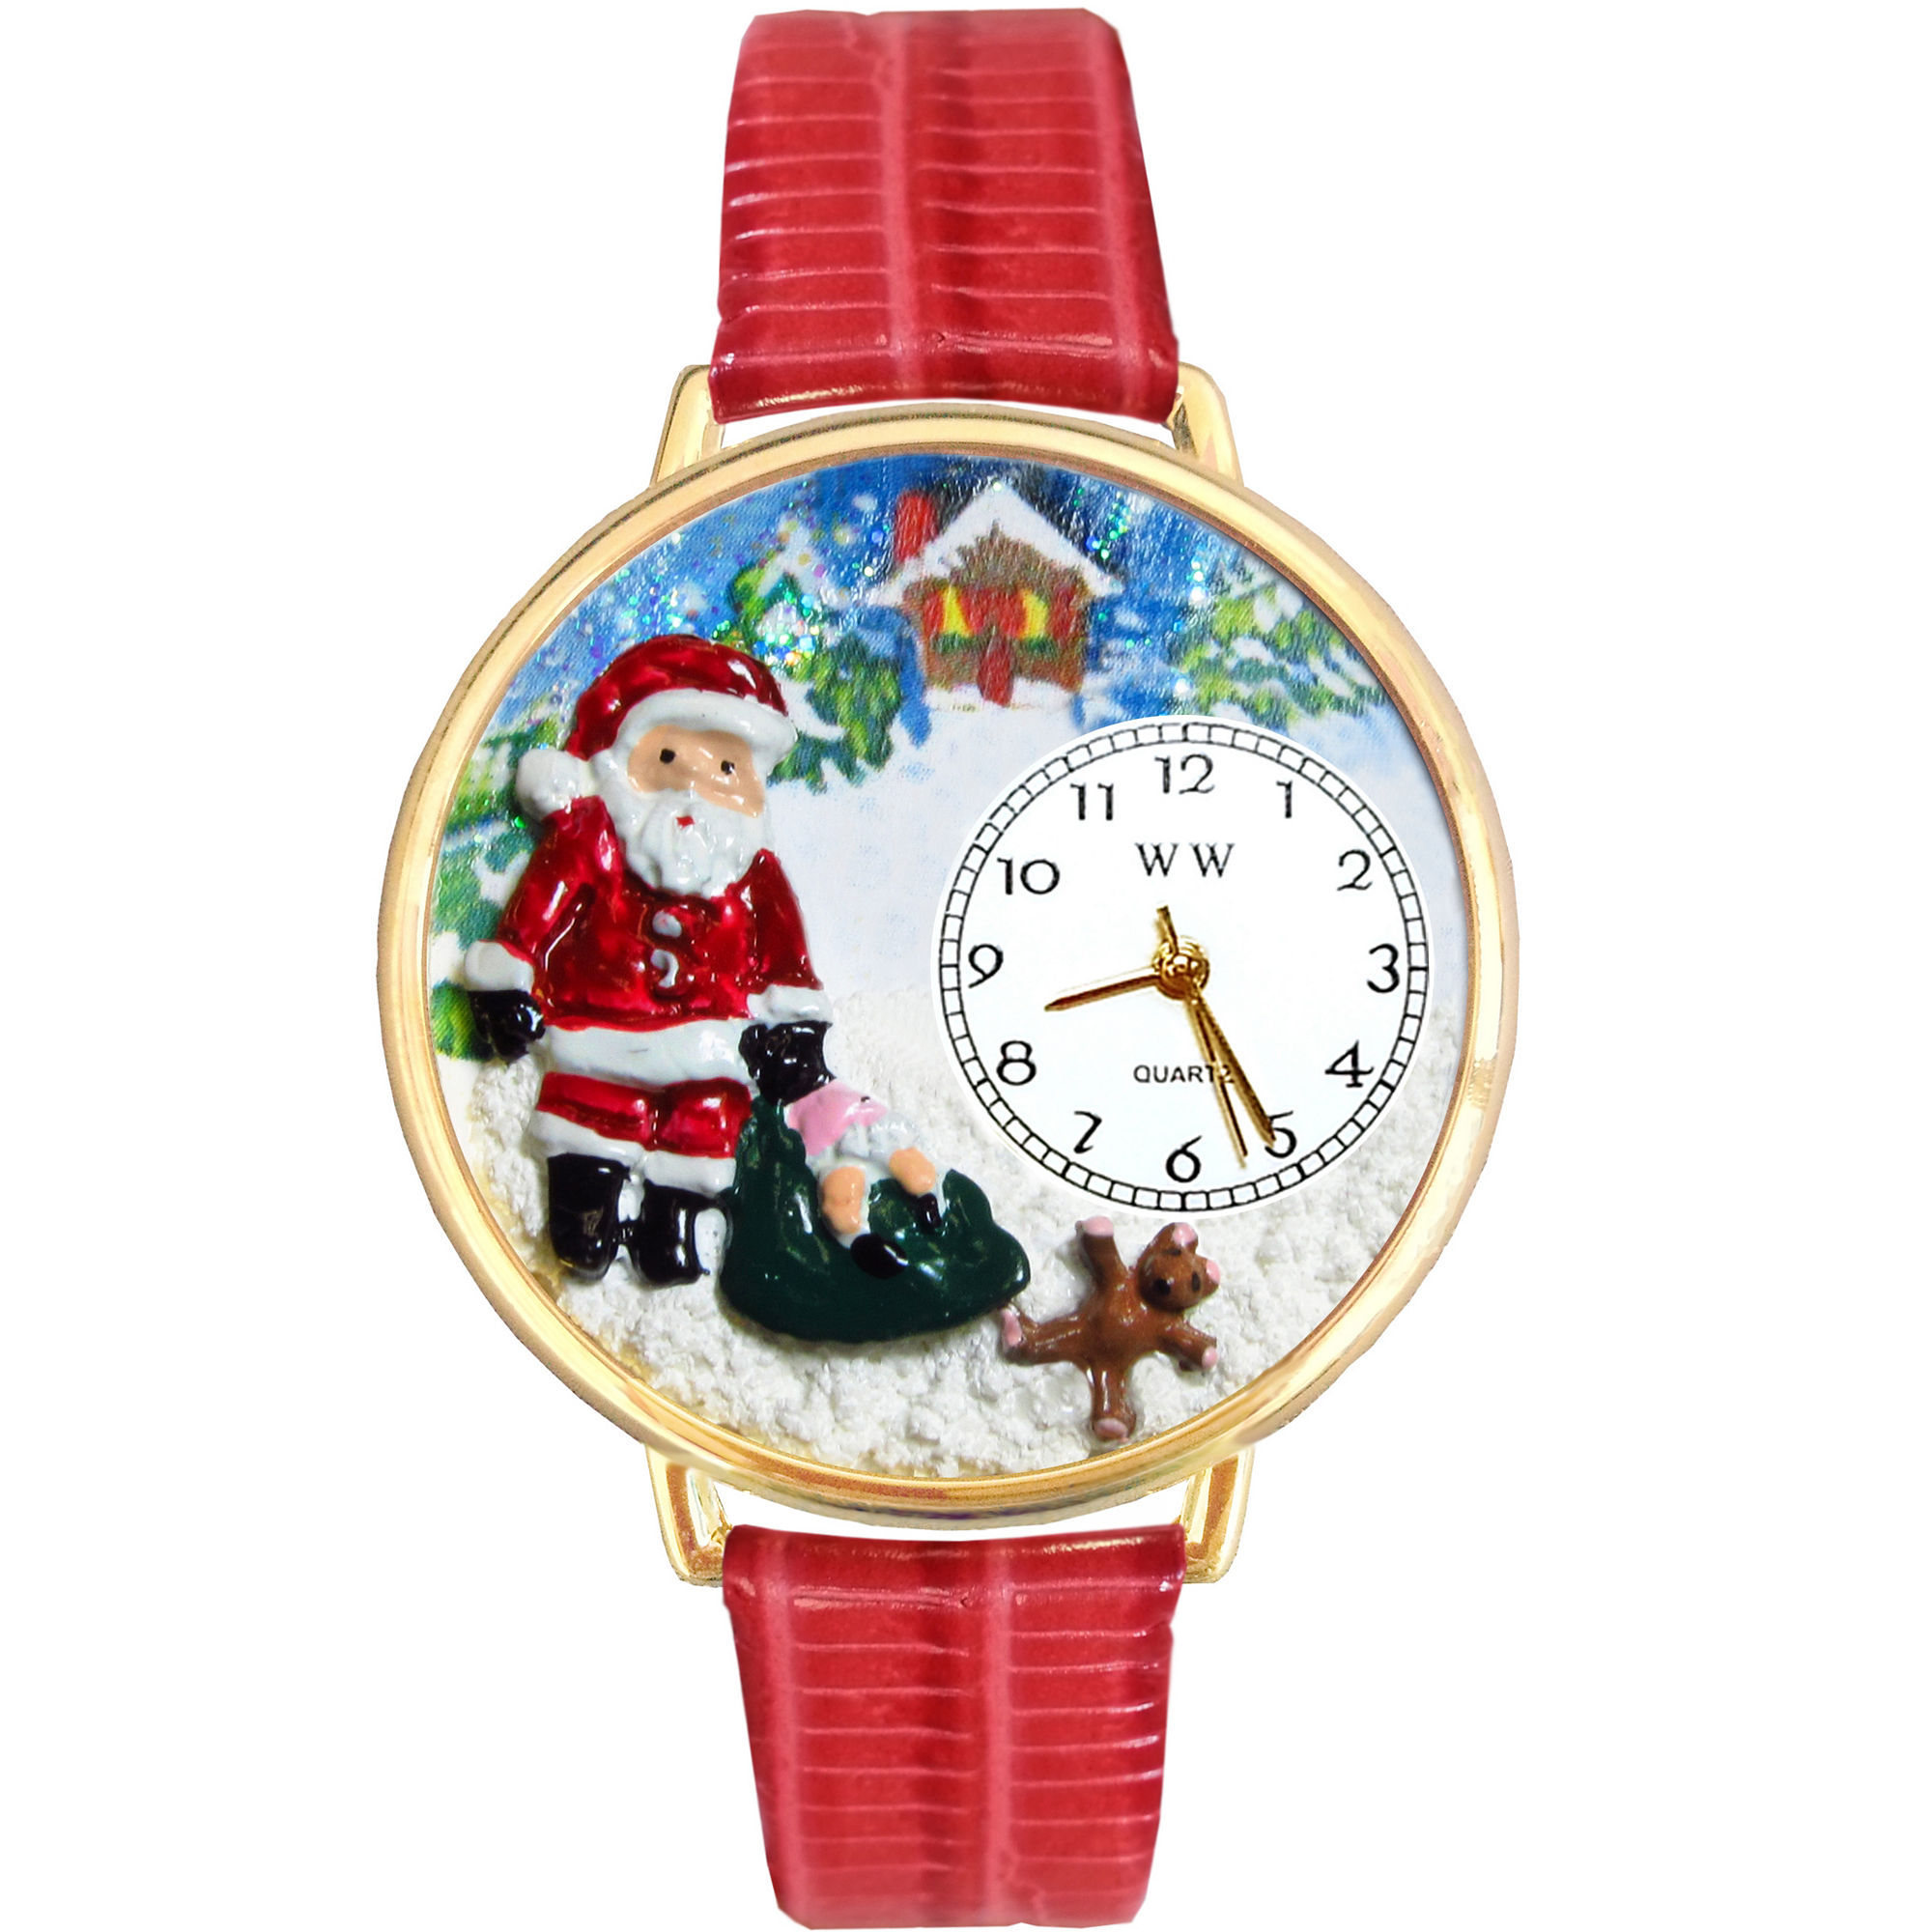 Whimsical Watches Personalized Christmas Santa Claus Womens Gold-Tone Bezel Red Leather Strap Watch